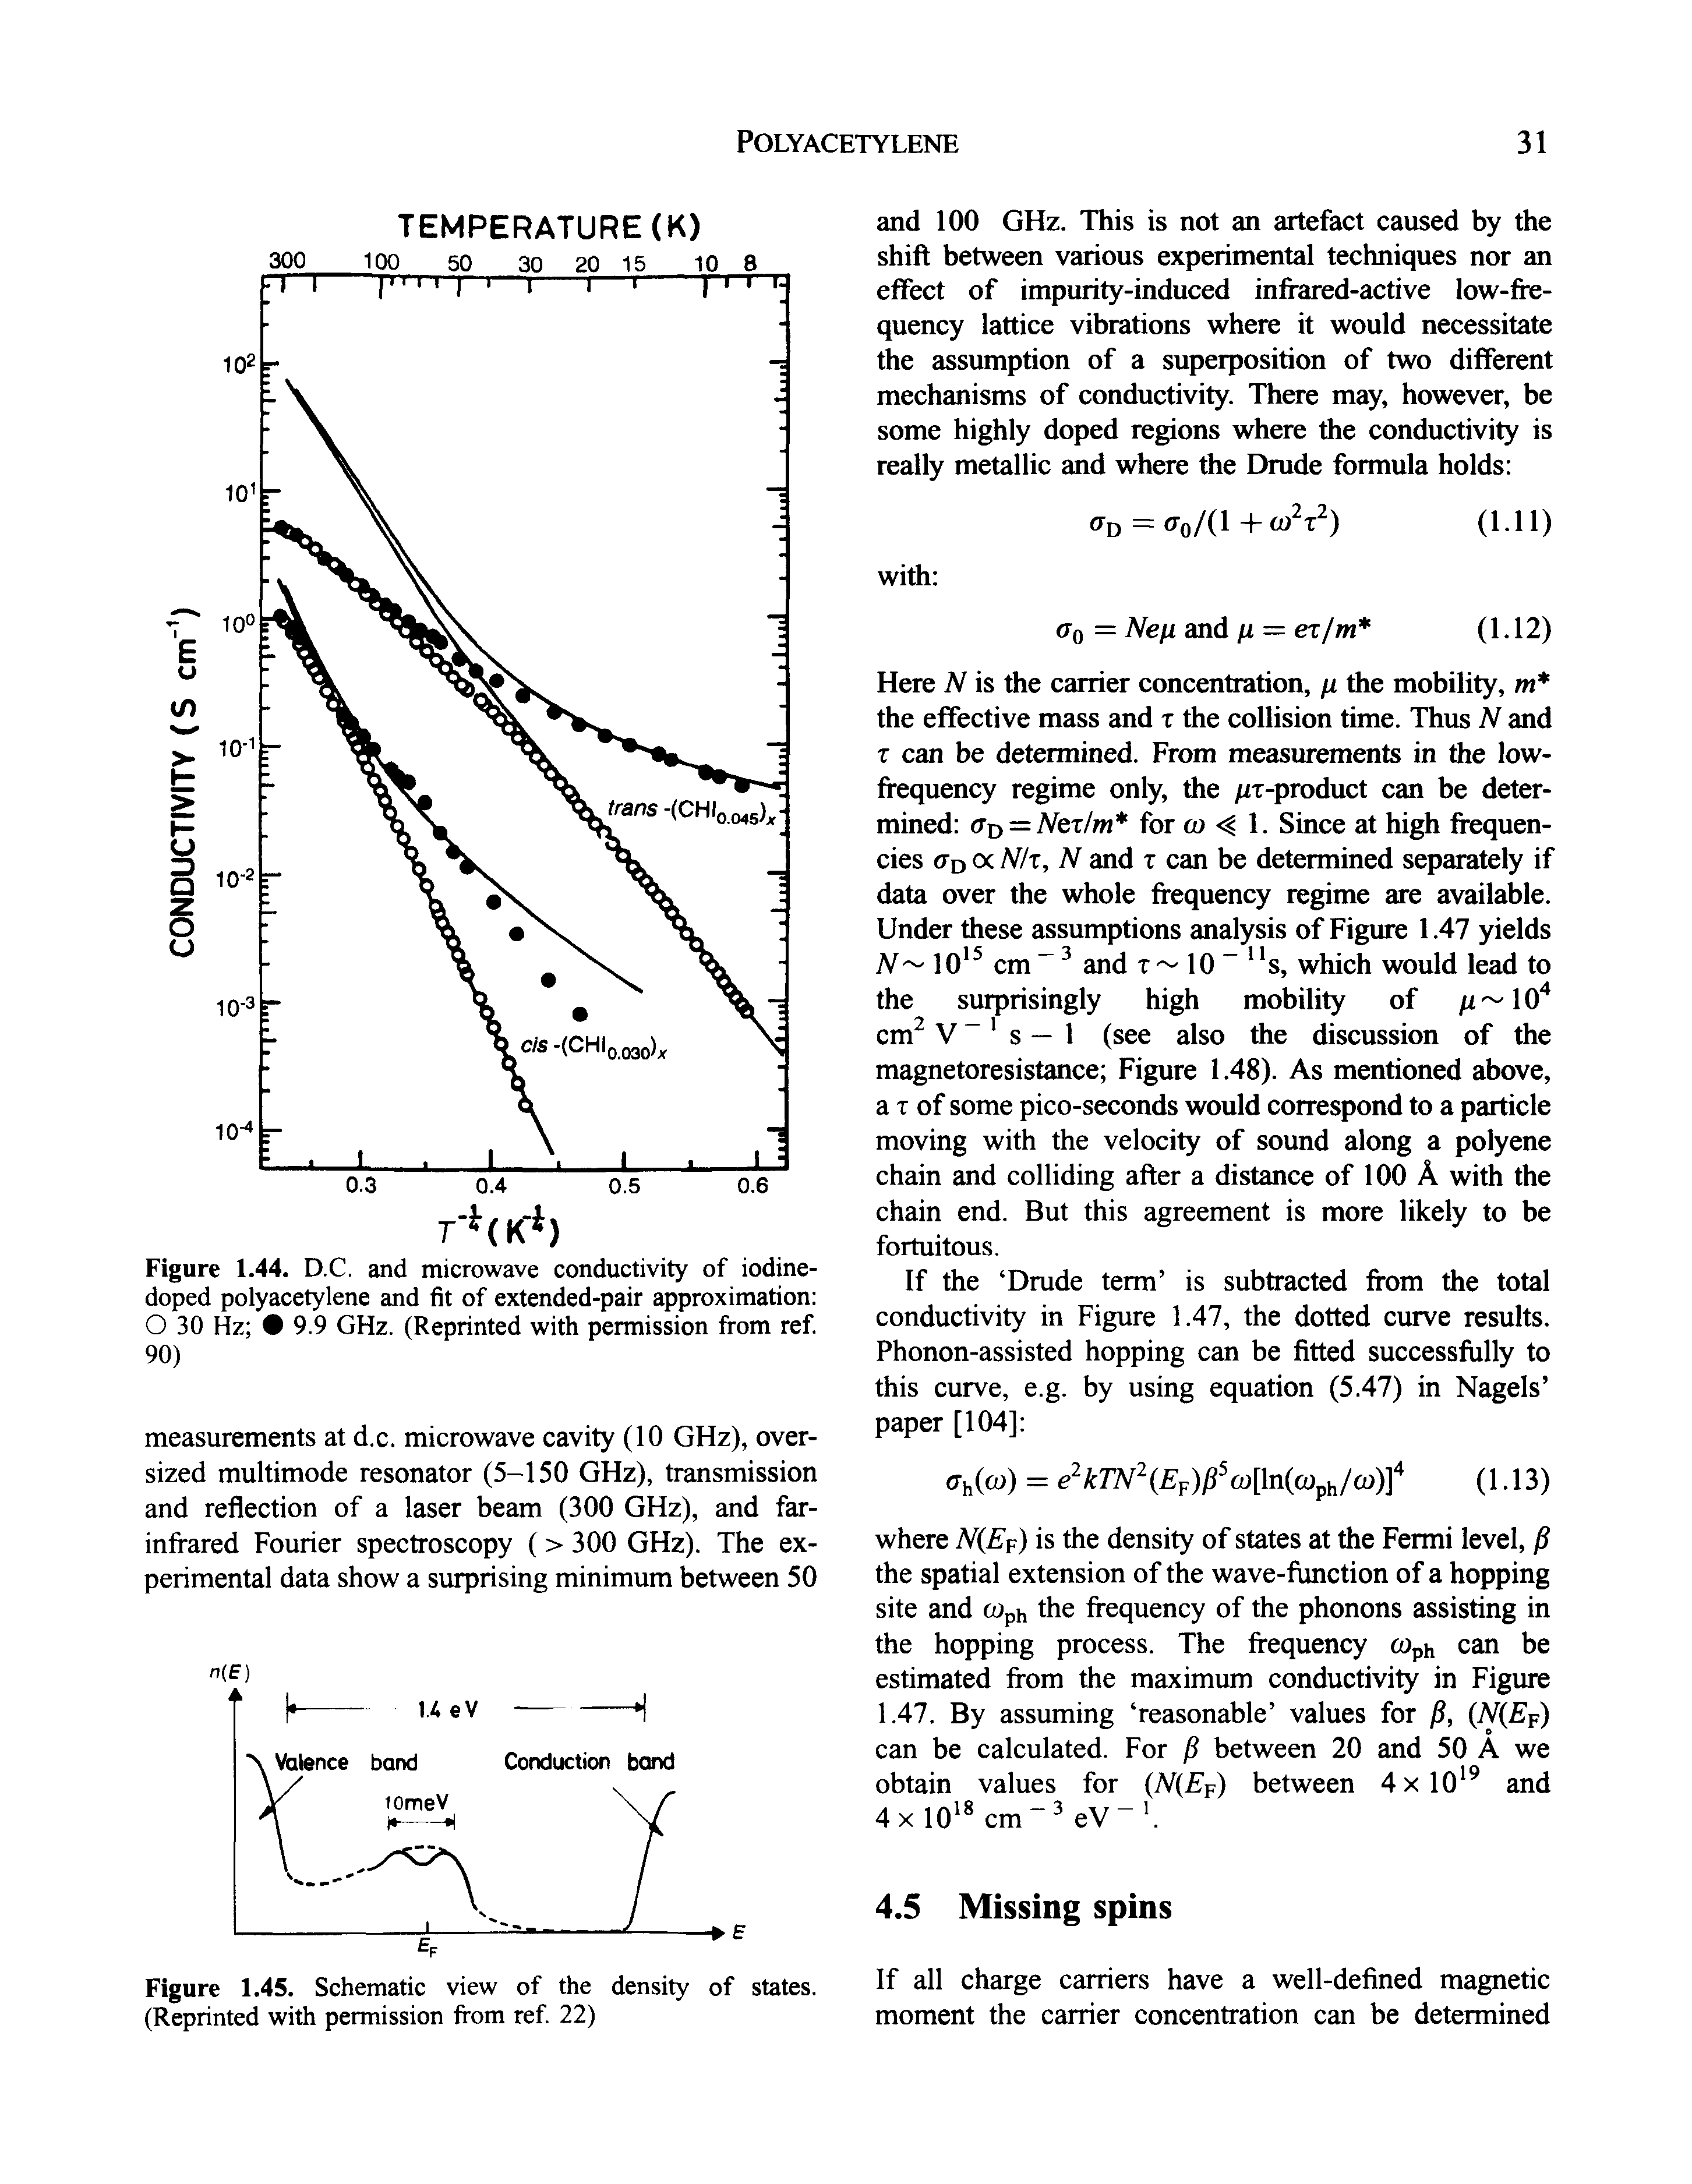 Figure 1.44. D.C. and microwave conductivity of iodine-doped polyacetylene and fit of extended-pair approximation O 30 Hz 9.9 GHz. (Reprinted with permission from ref 90)...